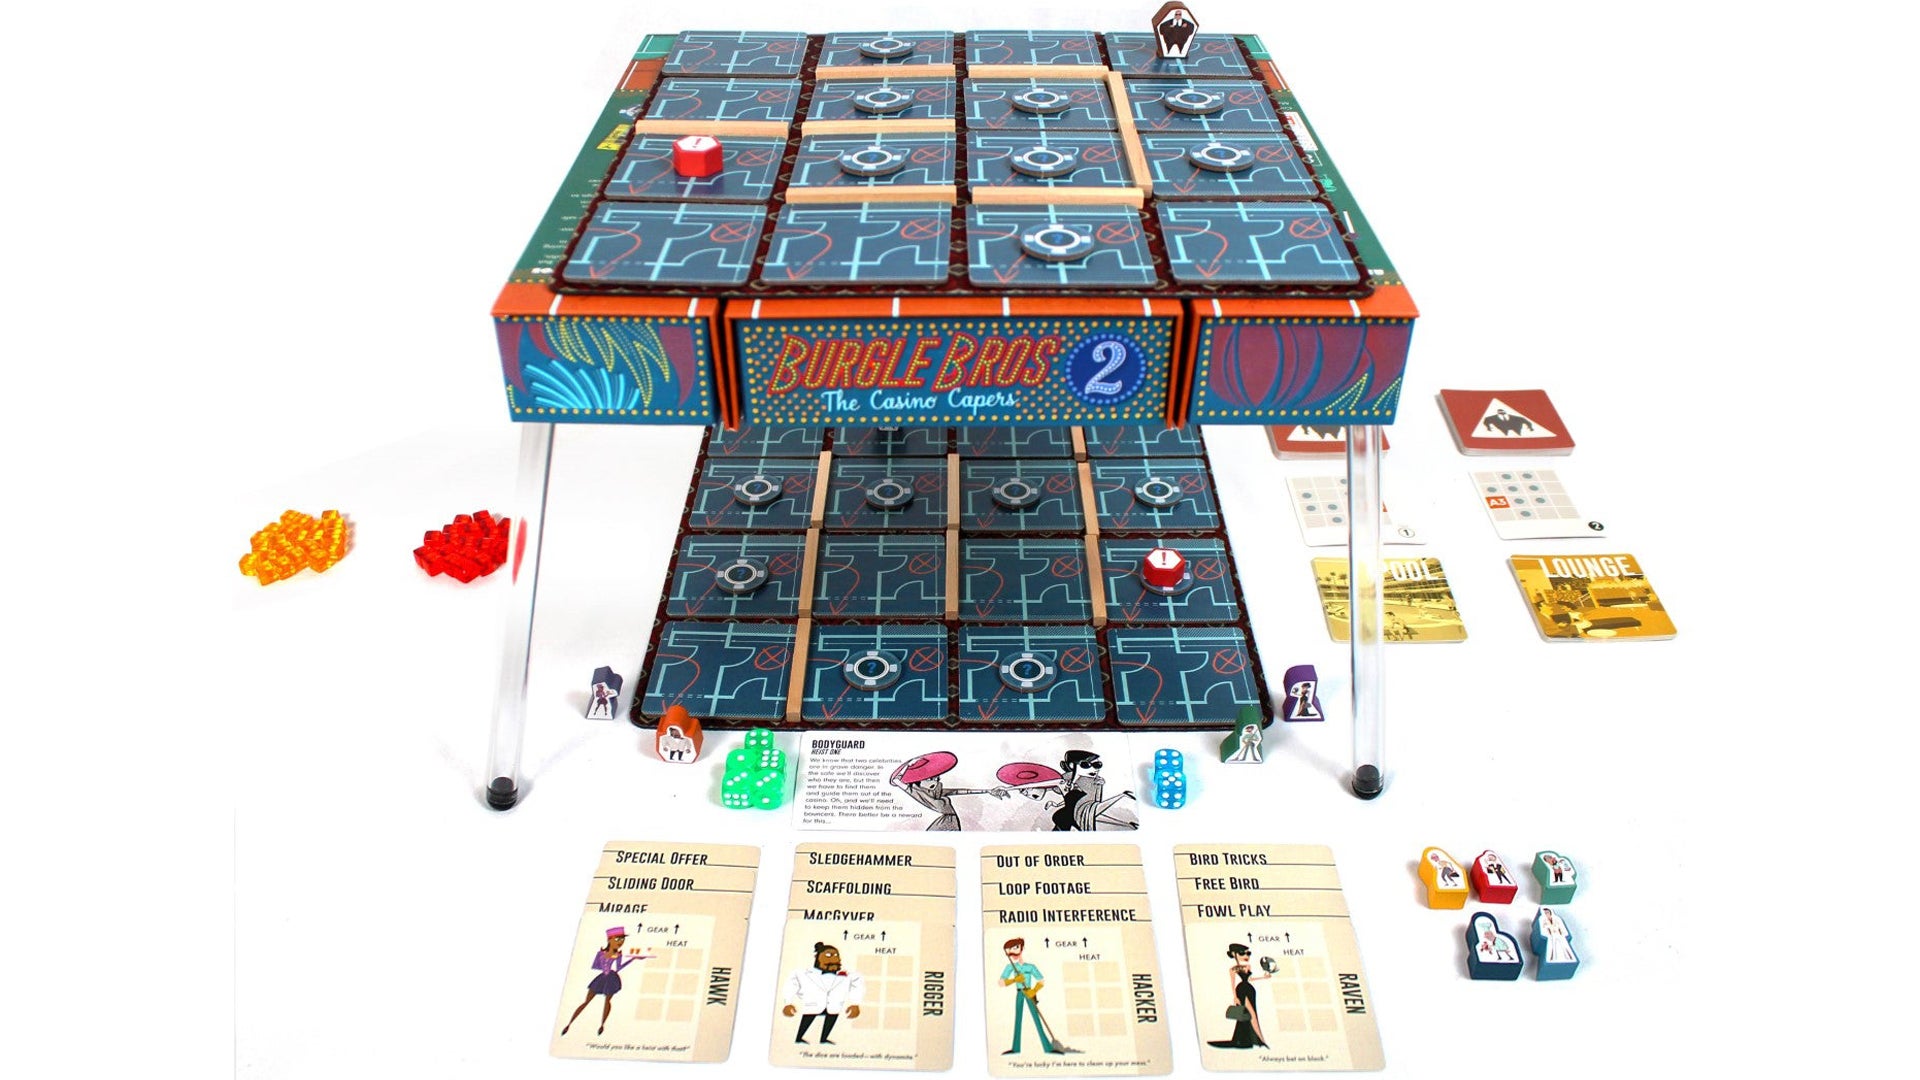 Burgle Bros 2: The Casino Capers layout image